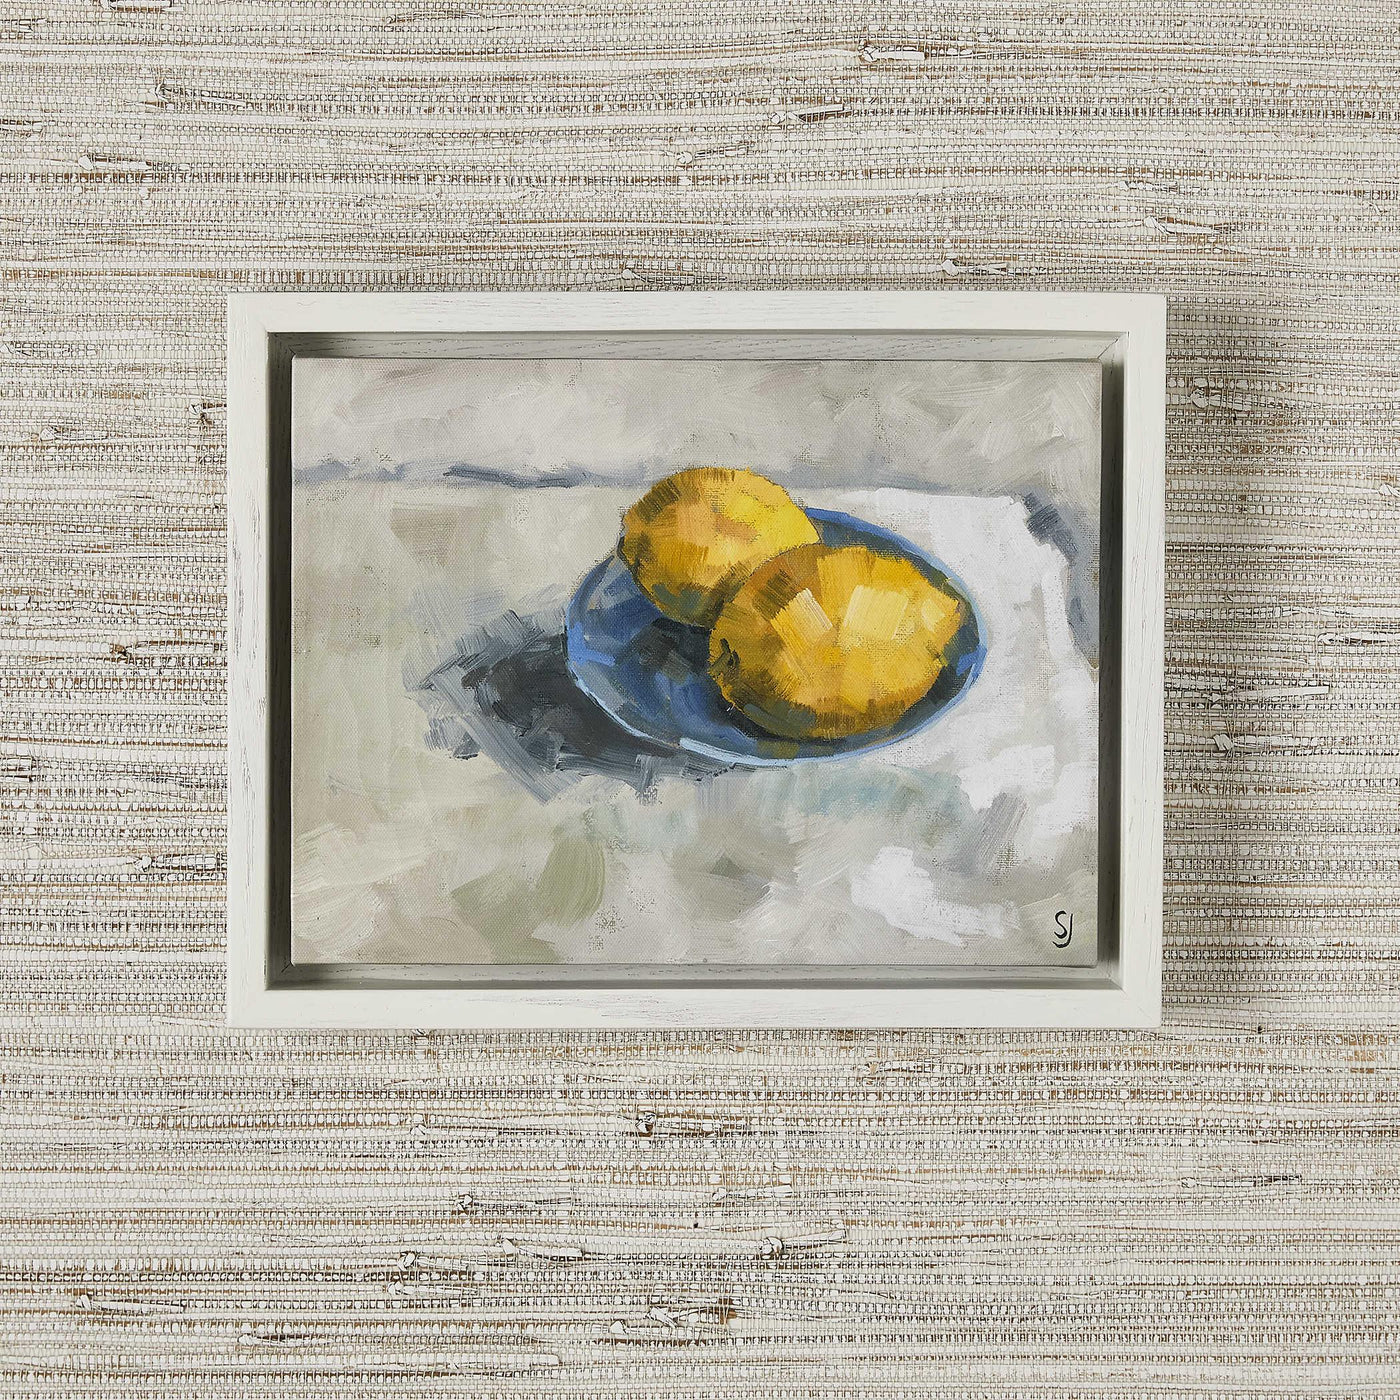 Uttermost Accessories Black Label when Life Gives You Lemons Framed Canvases, S/3 House of Isabella UK